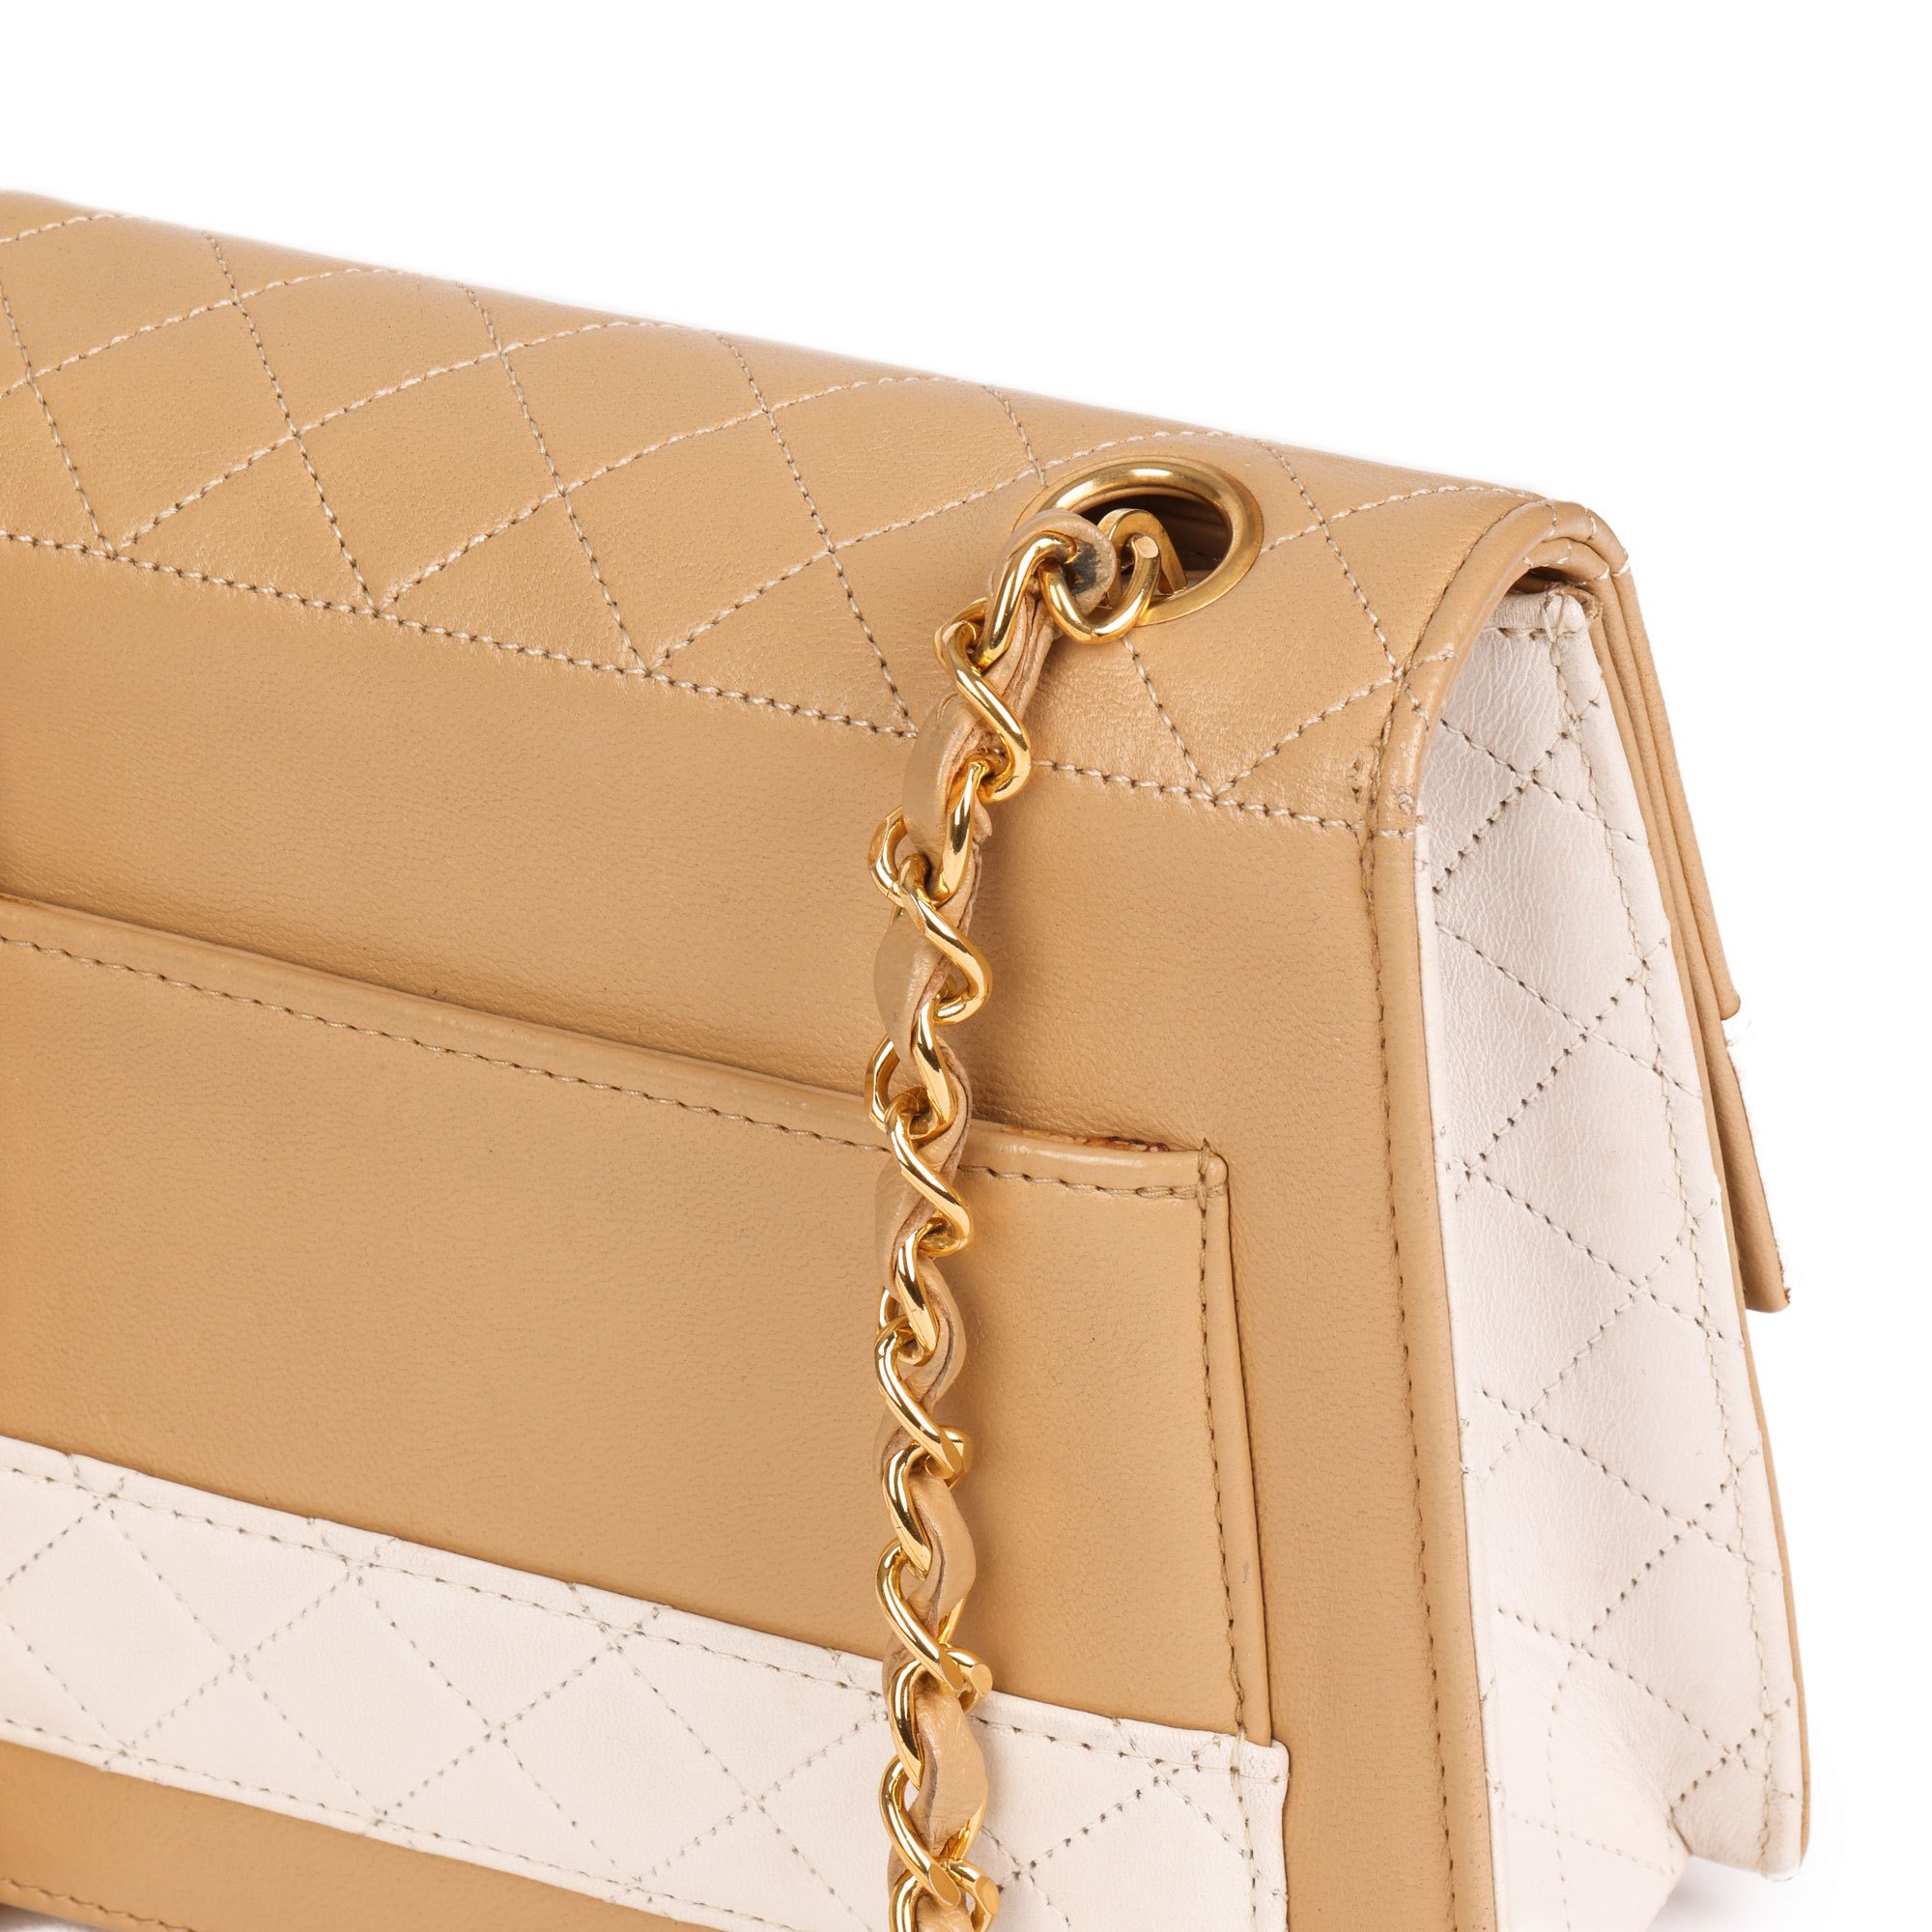 Chanel Beige & White Quilted Lambskin Vintage Mini Trapeze Classic Single Flap Bag with Pouch